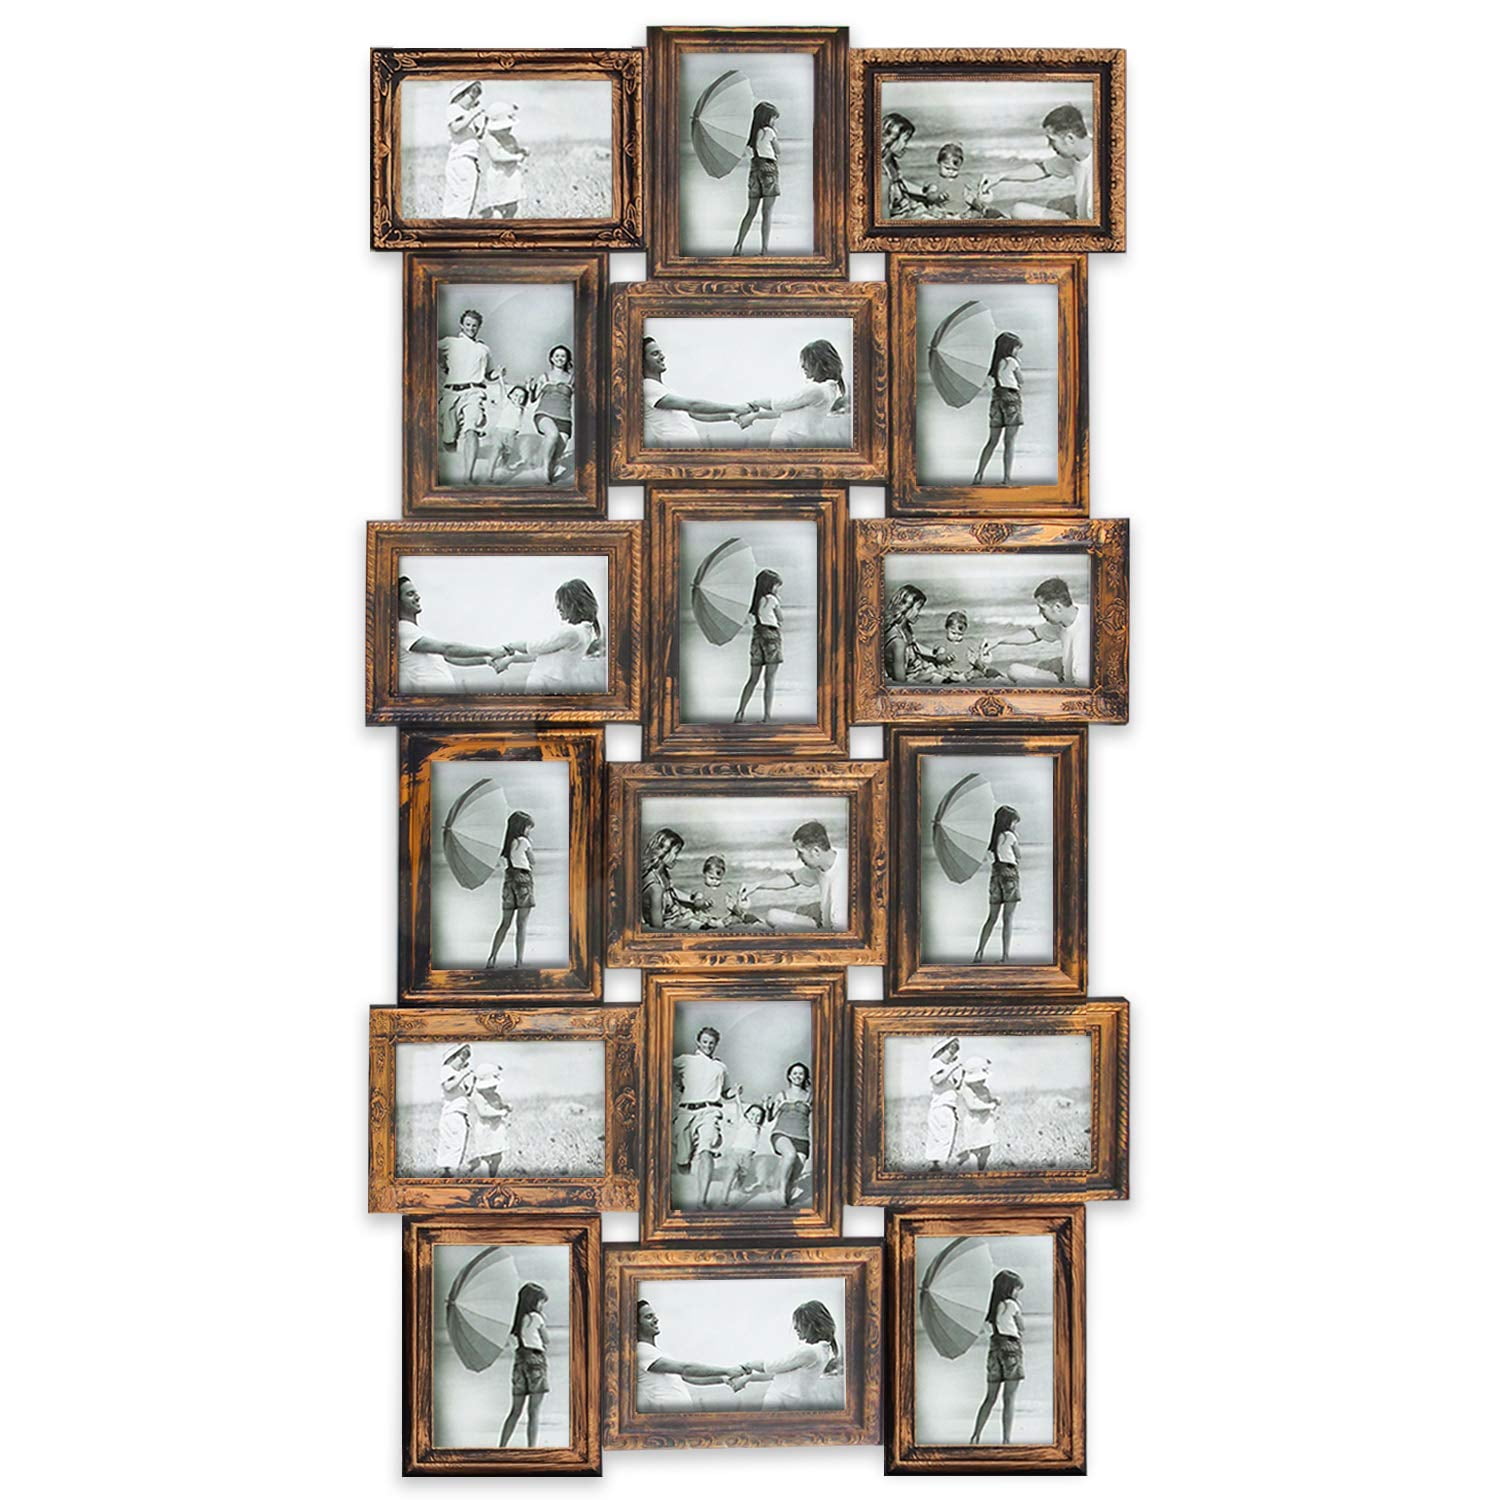 12 CUTE PICTURE FRAMES novelty frame photo bulk lot NEW photos holder display 